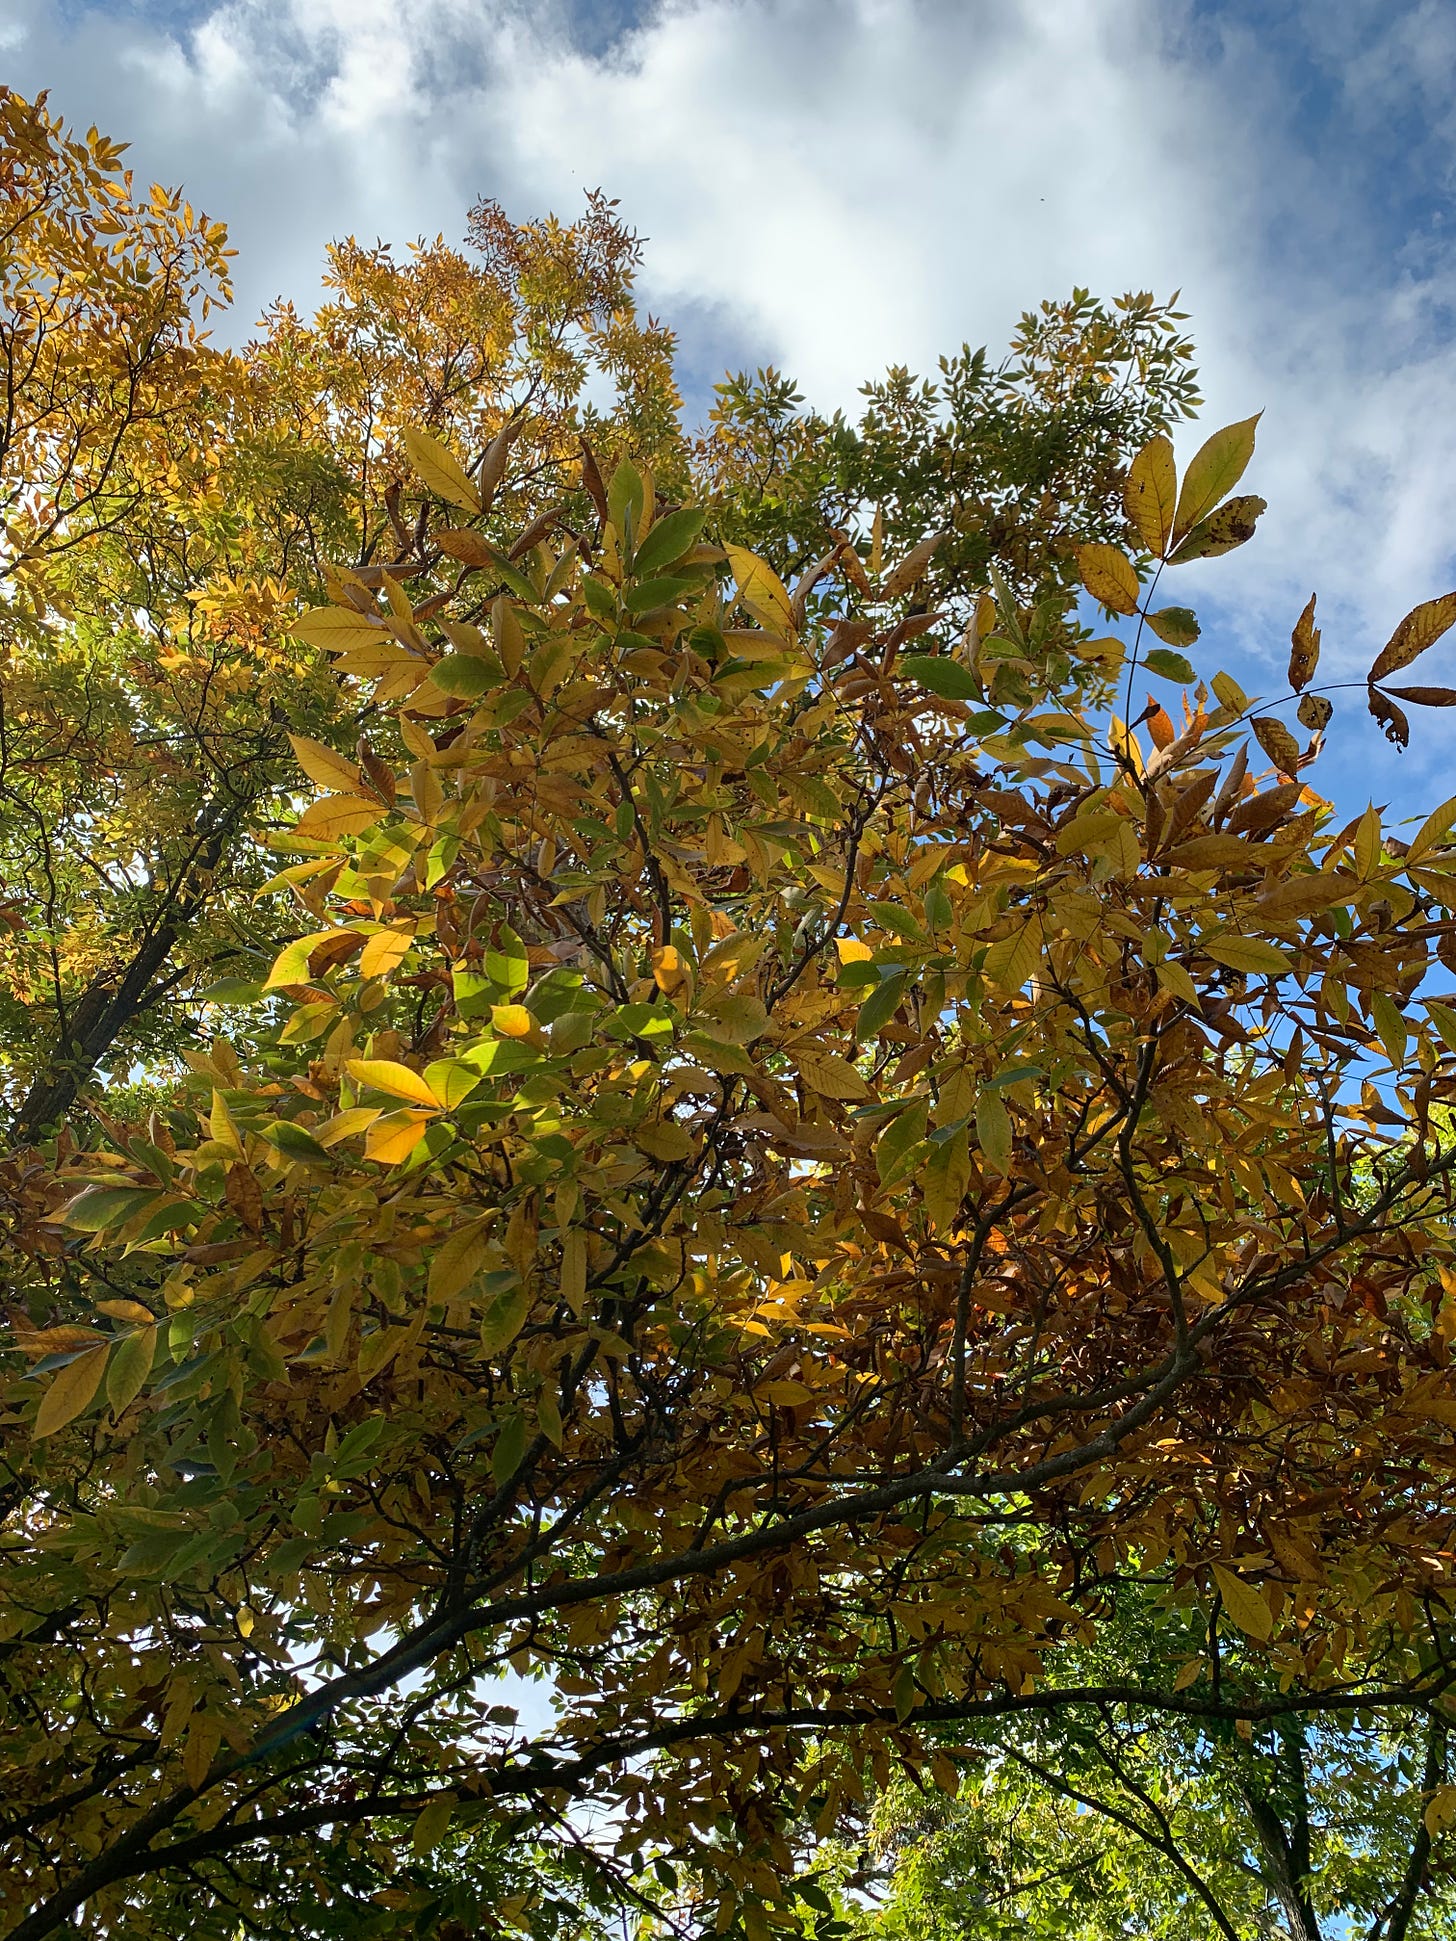 Closeup photo of yellow/gold leaves with a few brown and green leaves scattered on branches.